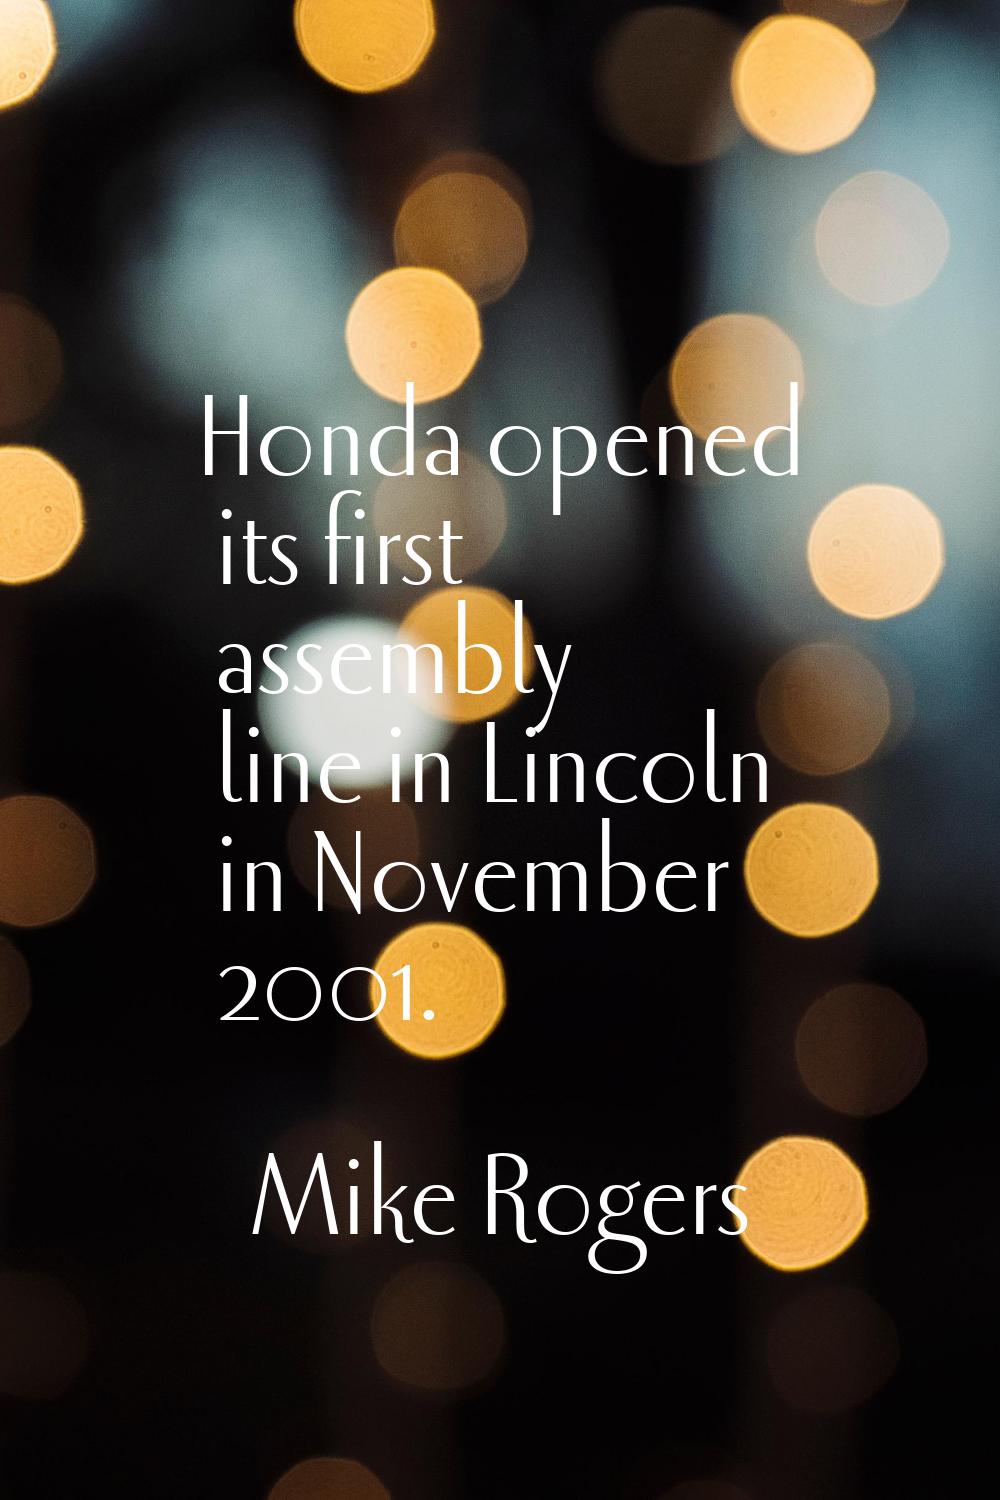 Honda opened its first assembly line in Lincoln in November 2001.